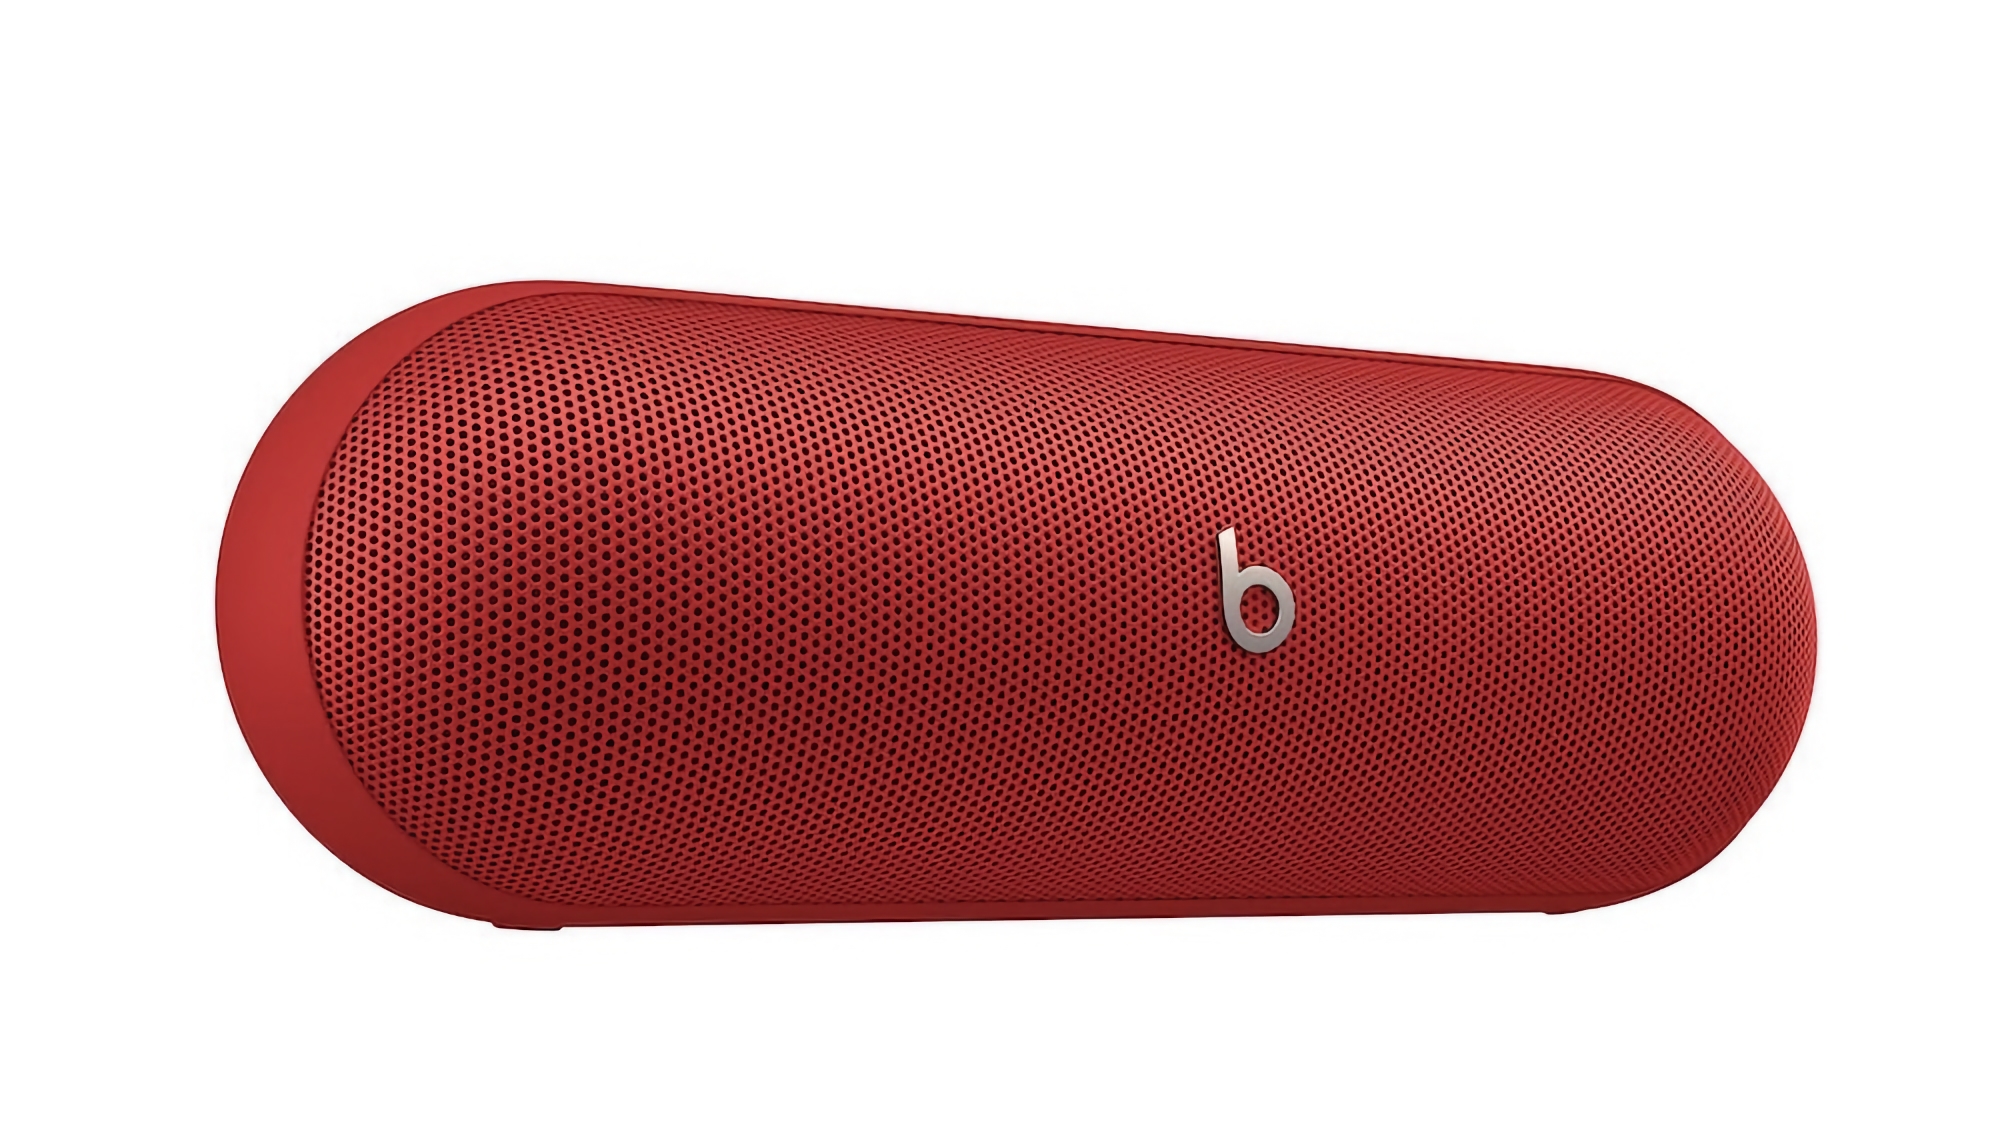 Better sound, up to 24 hours of battery life, IP67 protection and Find My support: Beats Pill wireless speaker specs have surfaced online 